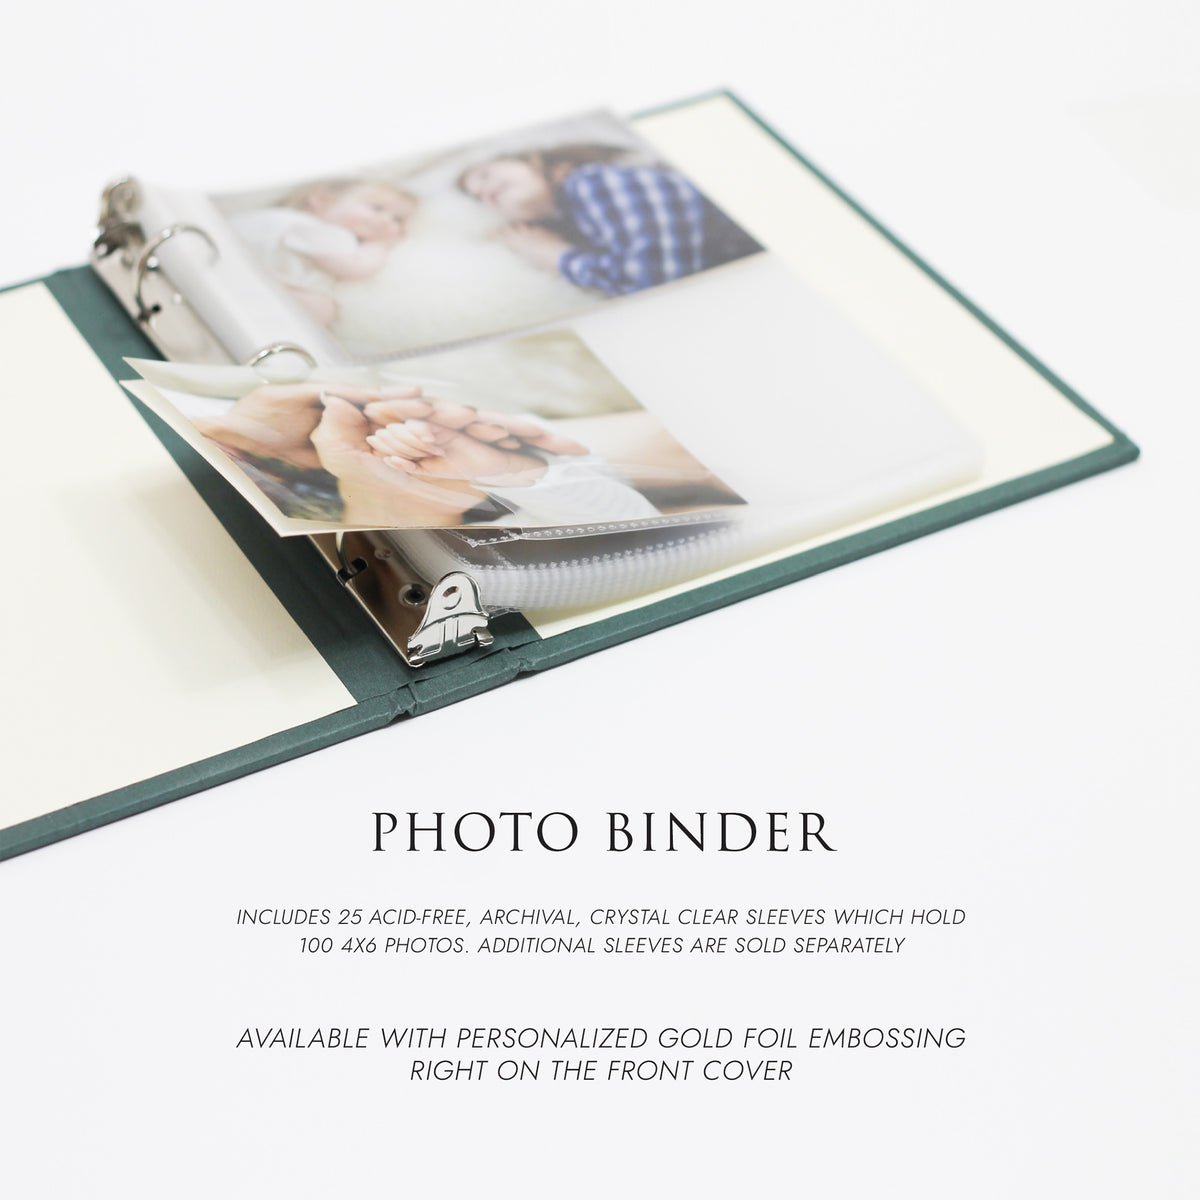 Medium Photo Binder For 4x6 Photos | Cover: Ballet Pink Cotton | Available Personalized